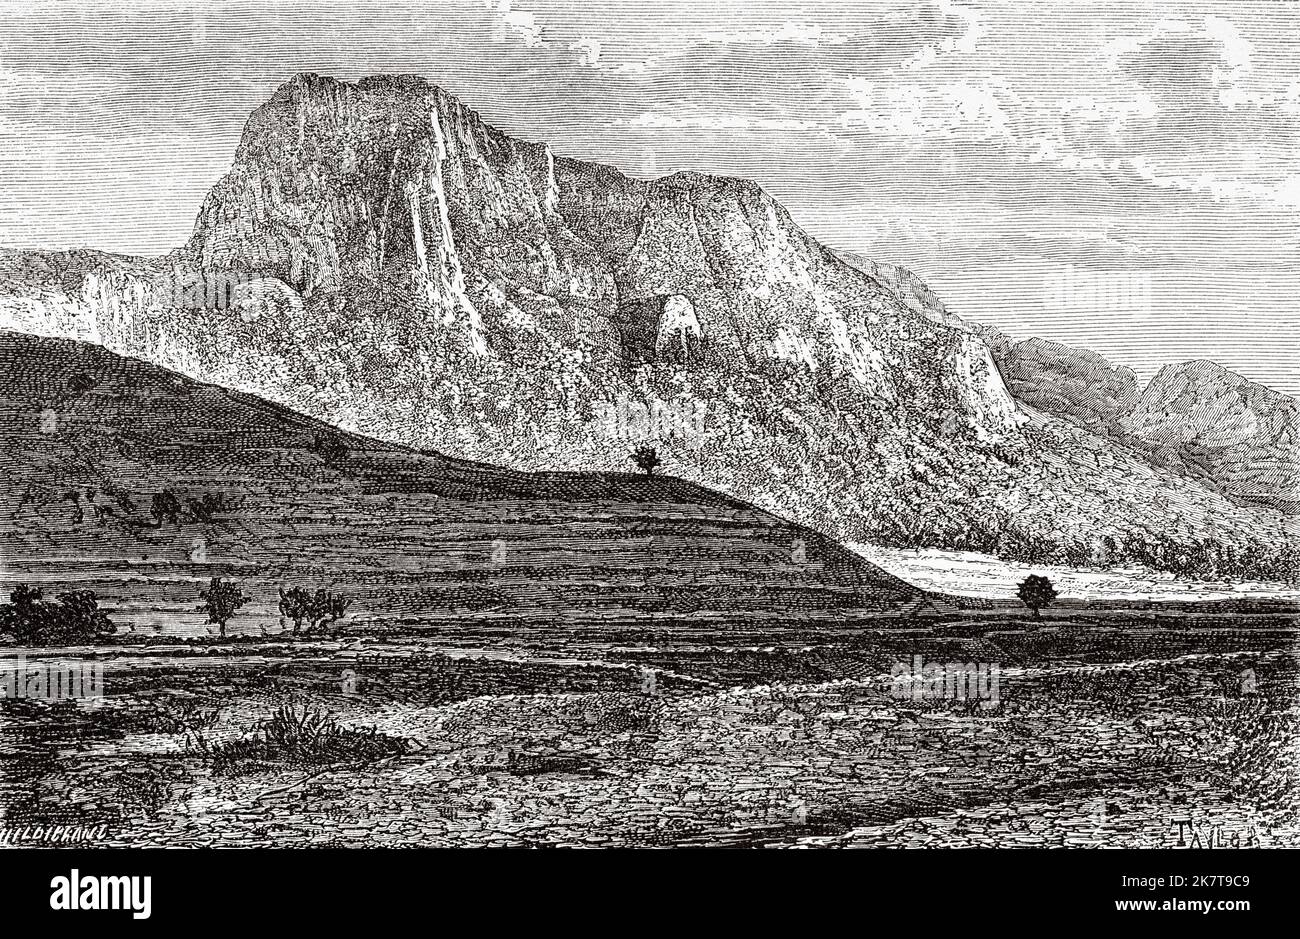 Szekely rock, Romania. Europe. Travel to the mining regions of western Transylvania by Jacques Elisee Reclus, 1873 Stock Photo